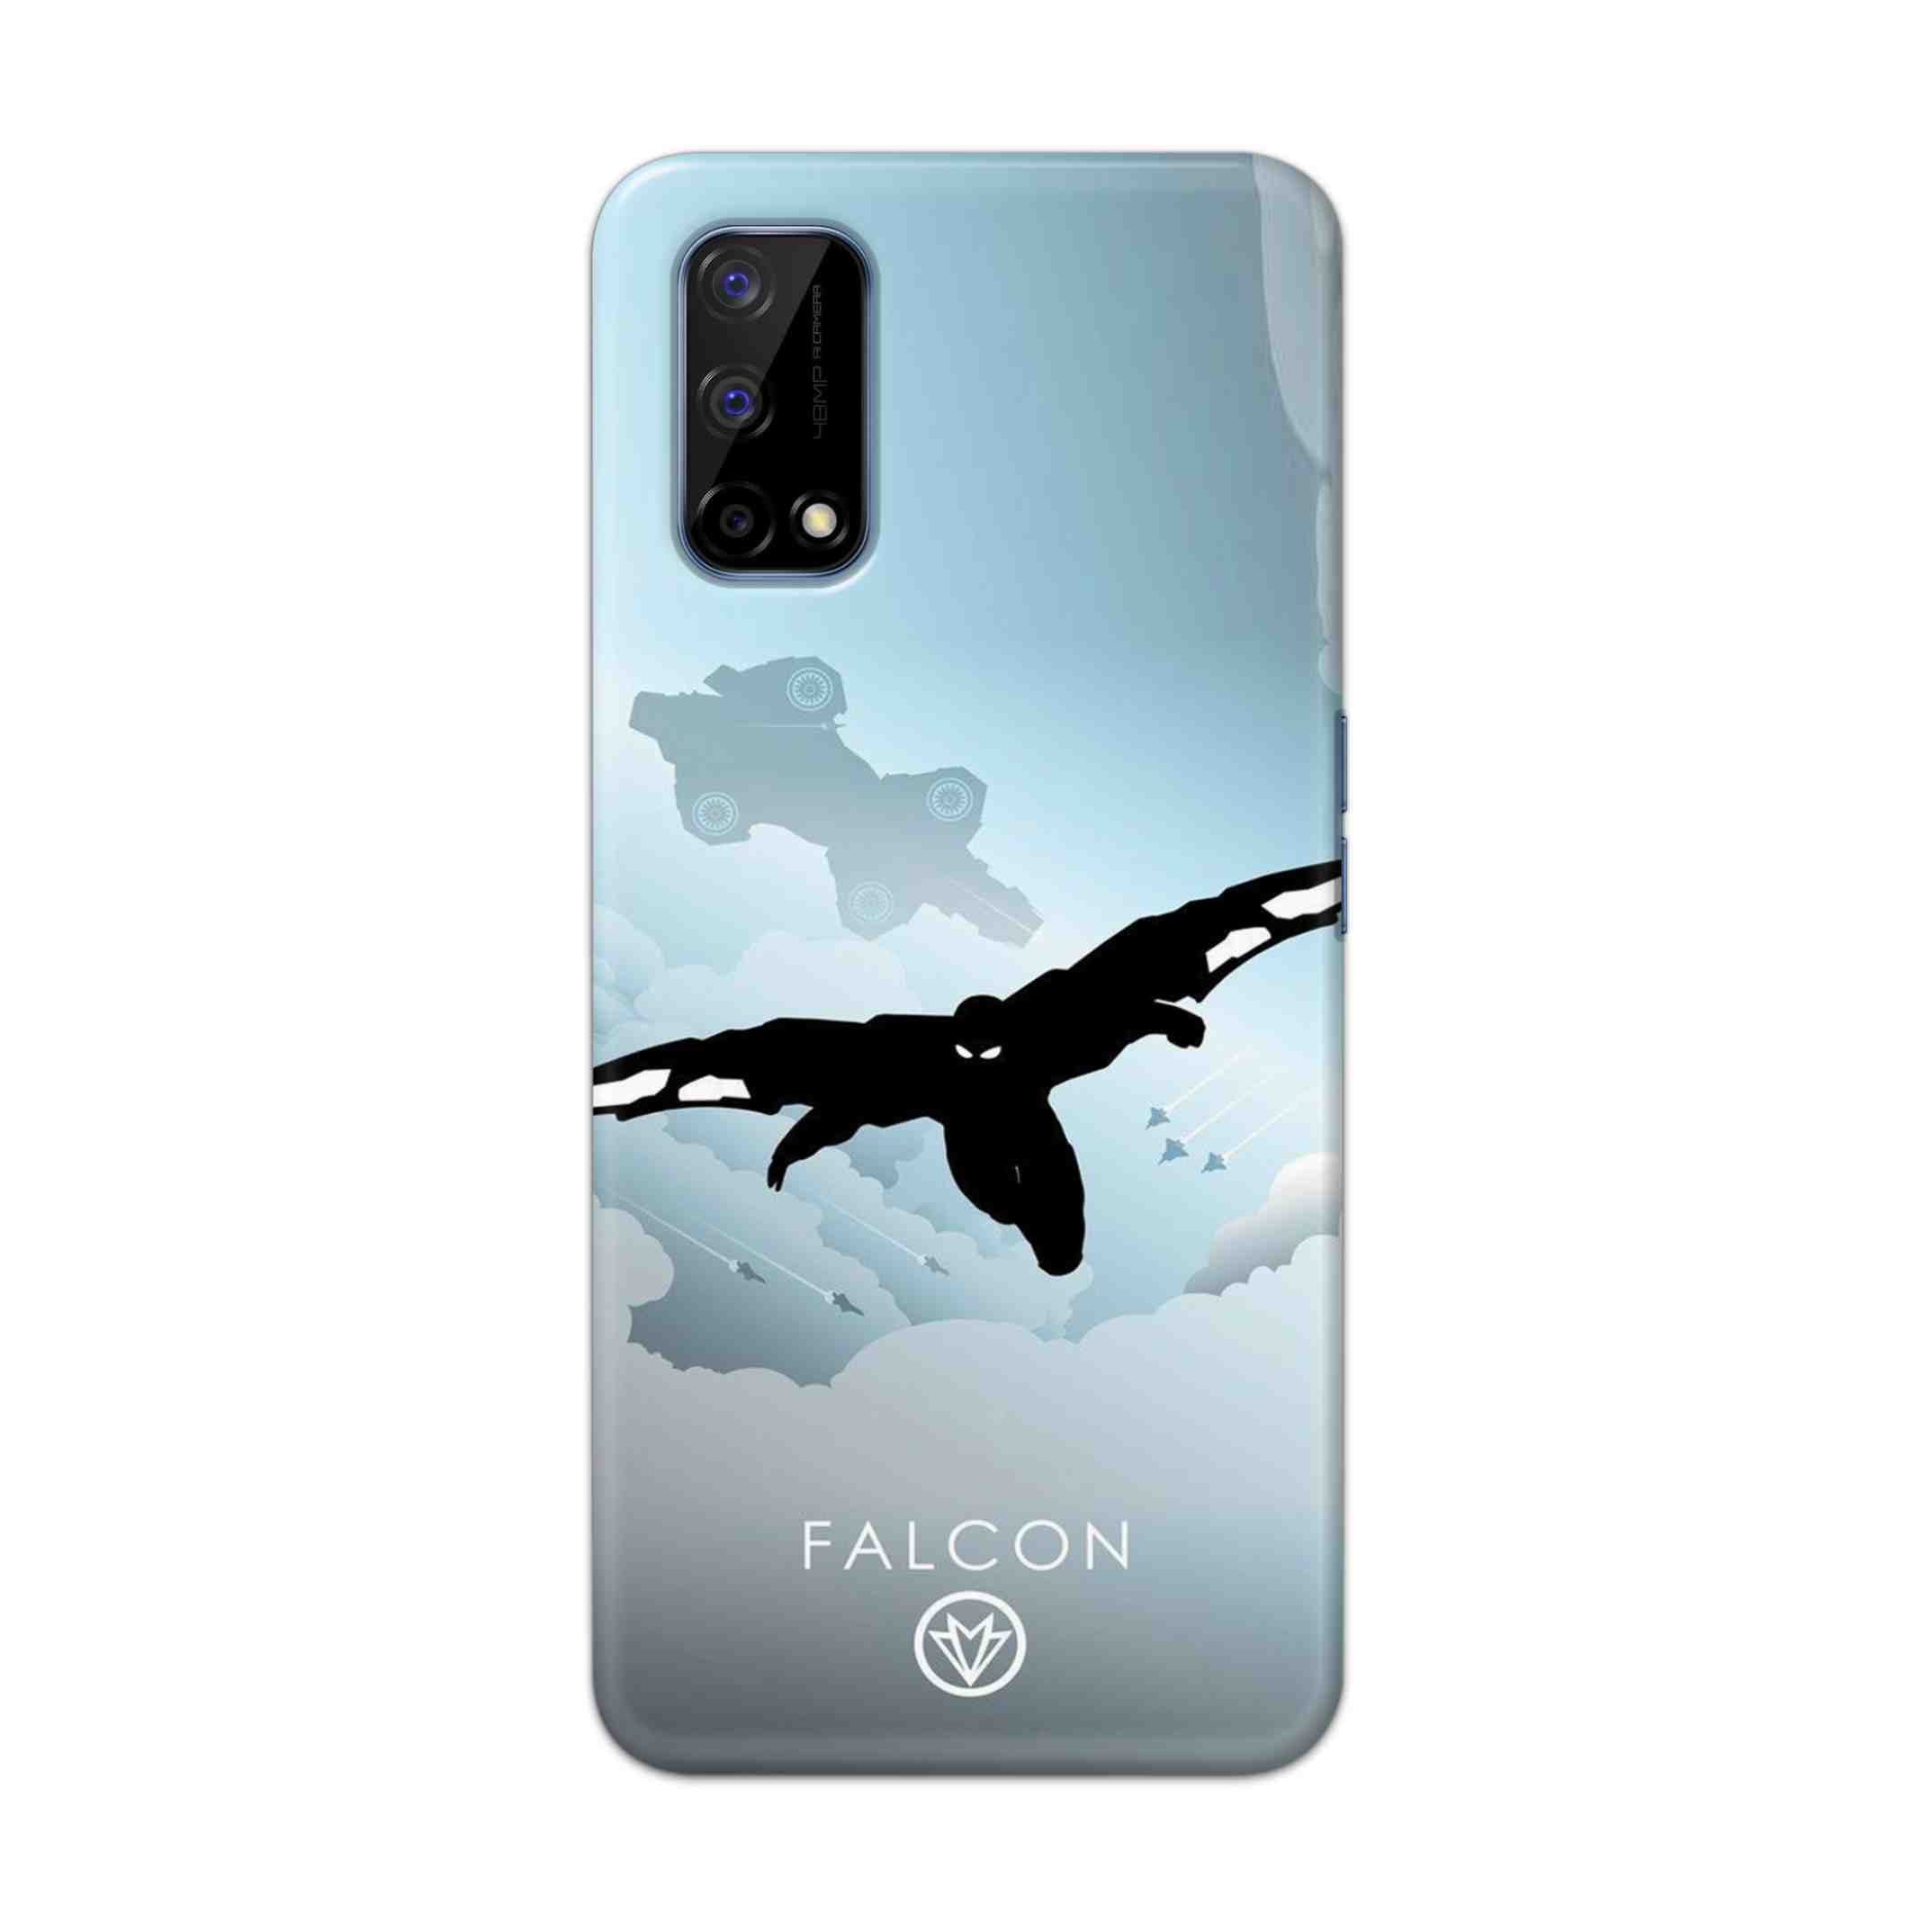 Buy Falcon Hard Back Mobile Phone Case Cover For Realme Narzo 30 Pro Online